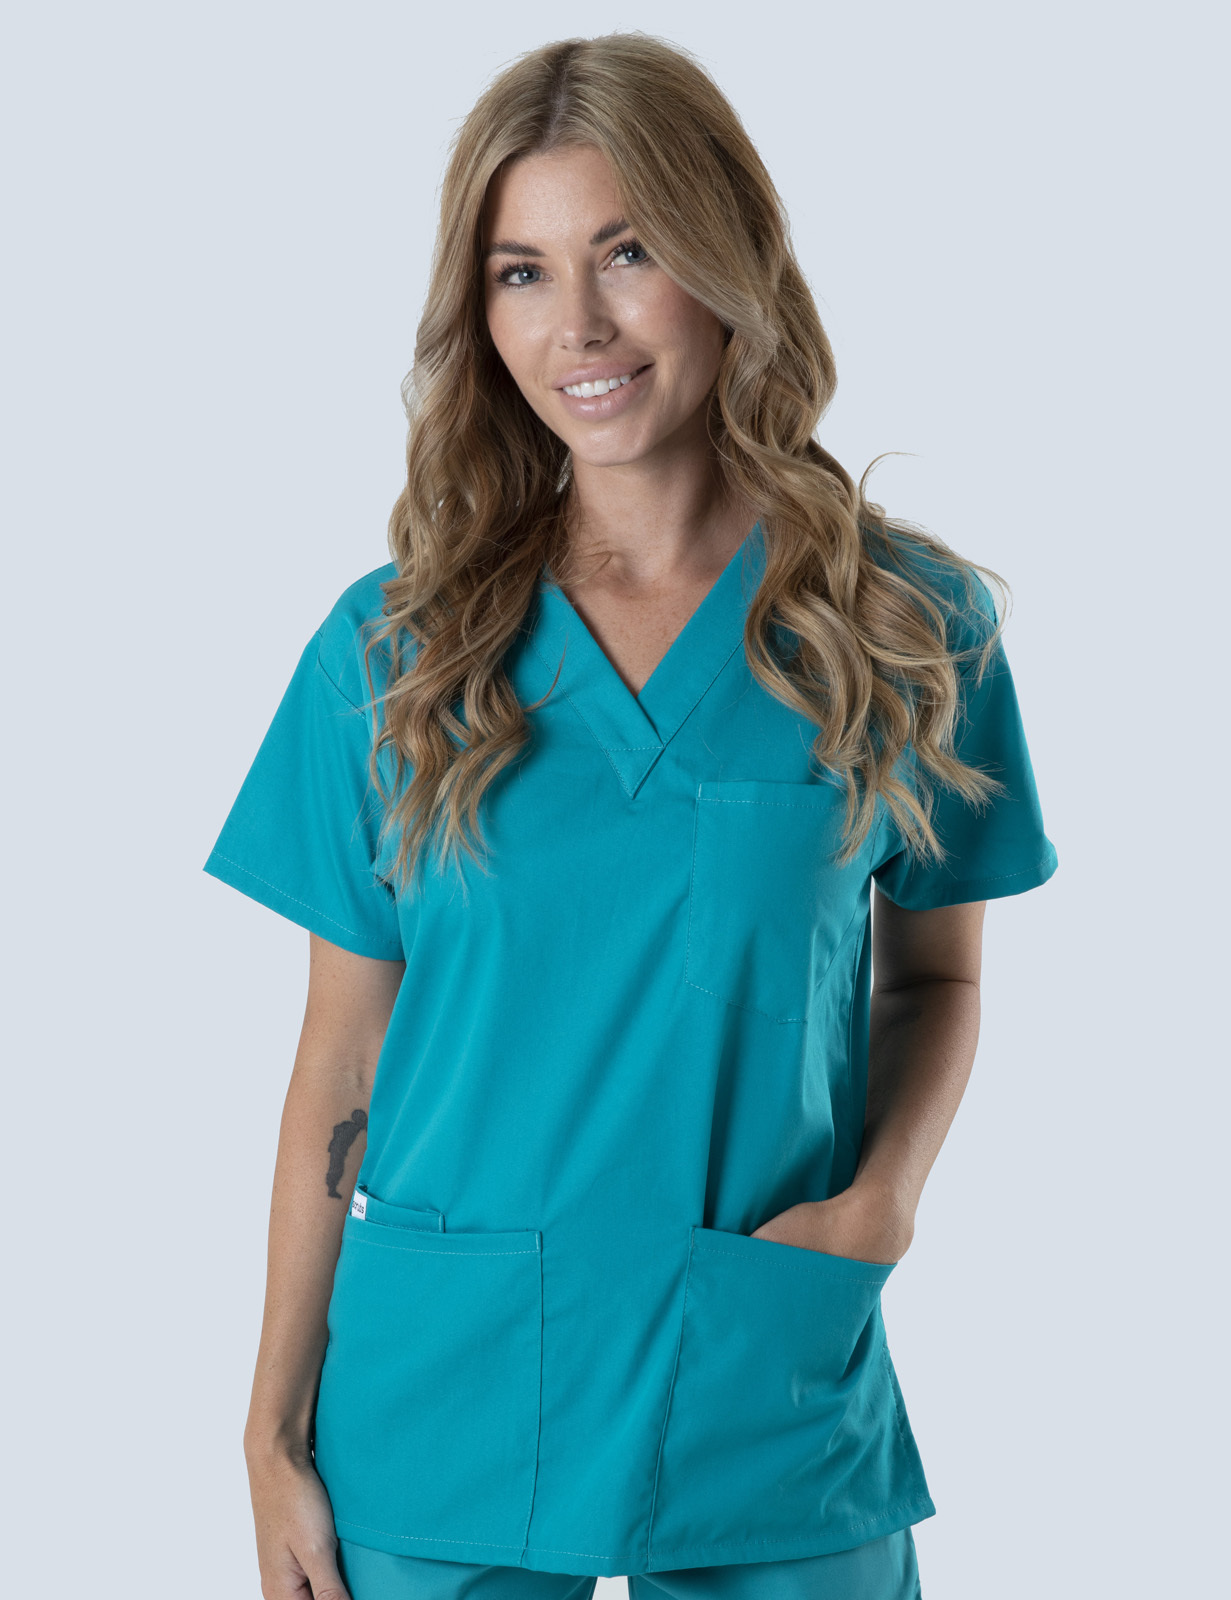 Gold Coast University Hospital - Children's Services RN (4 Pocket Scrub Top and Cargo Pants in Teal incl Logos)